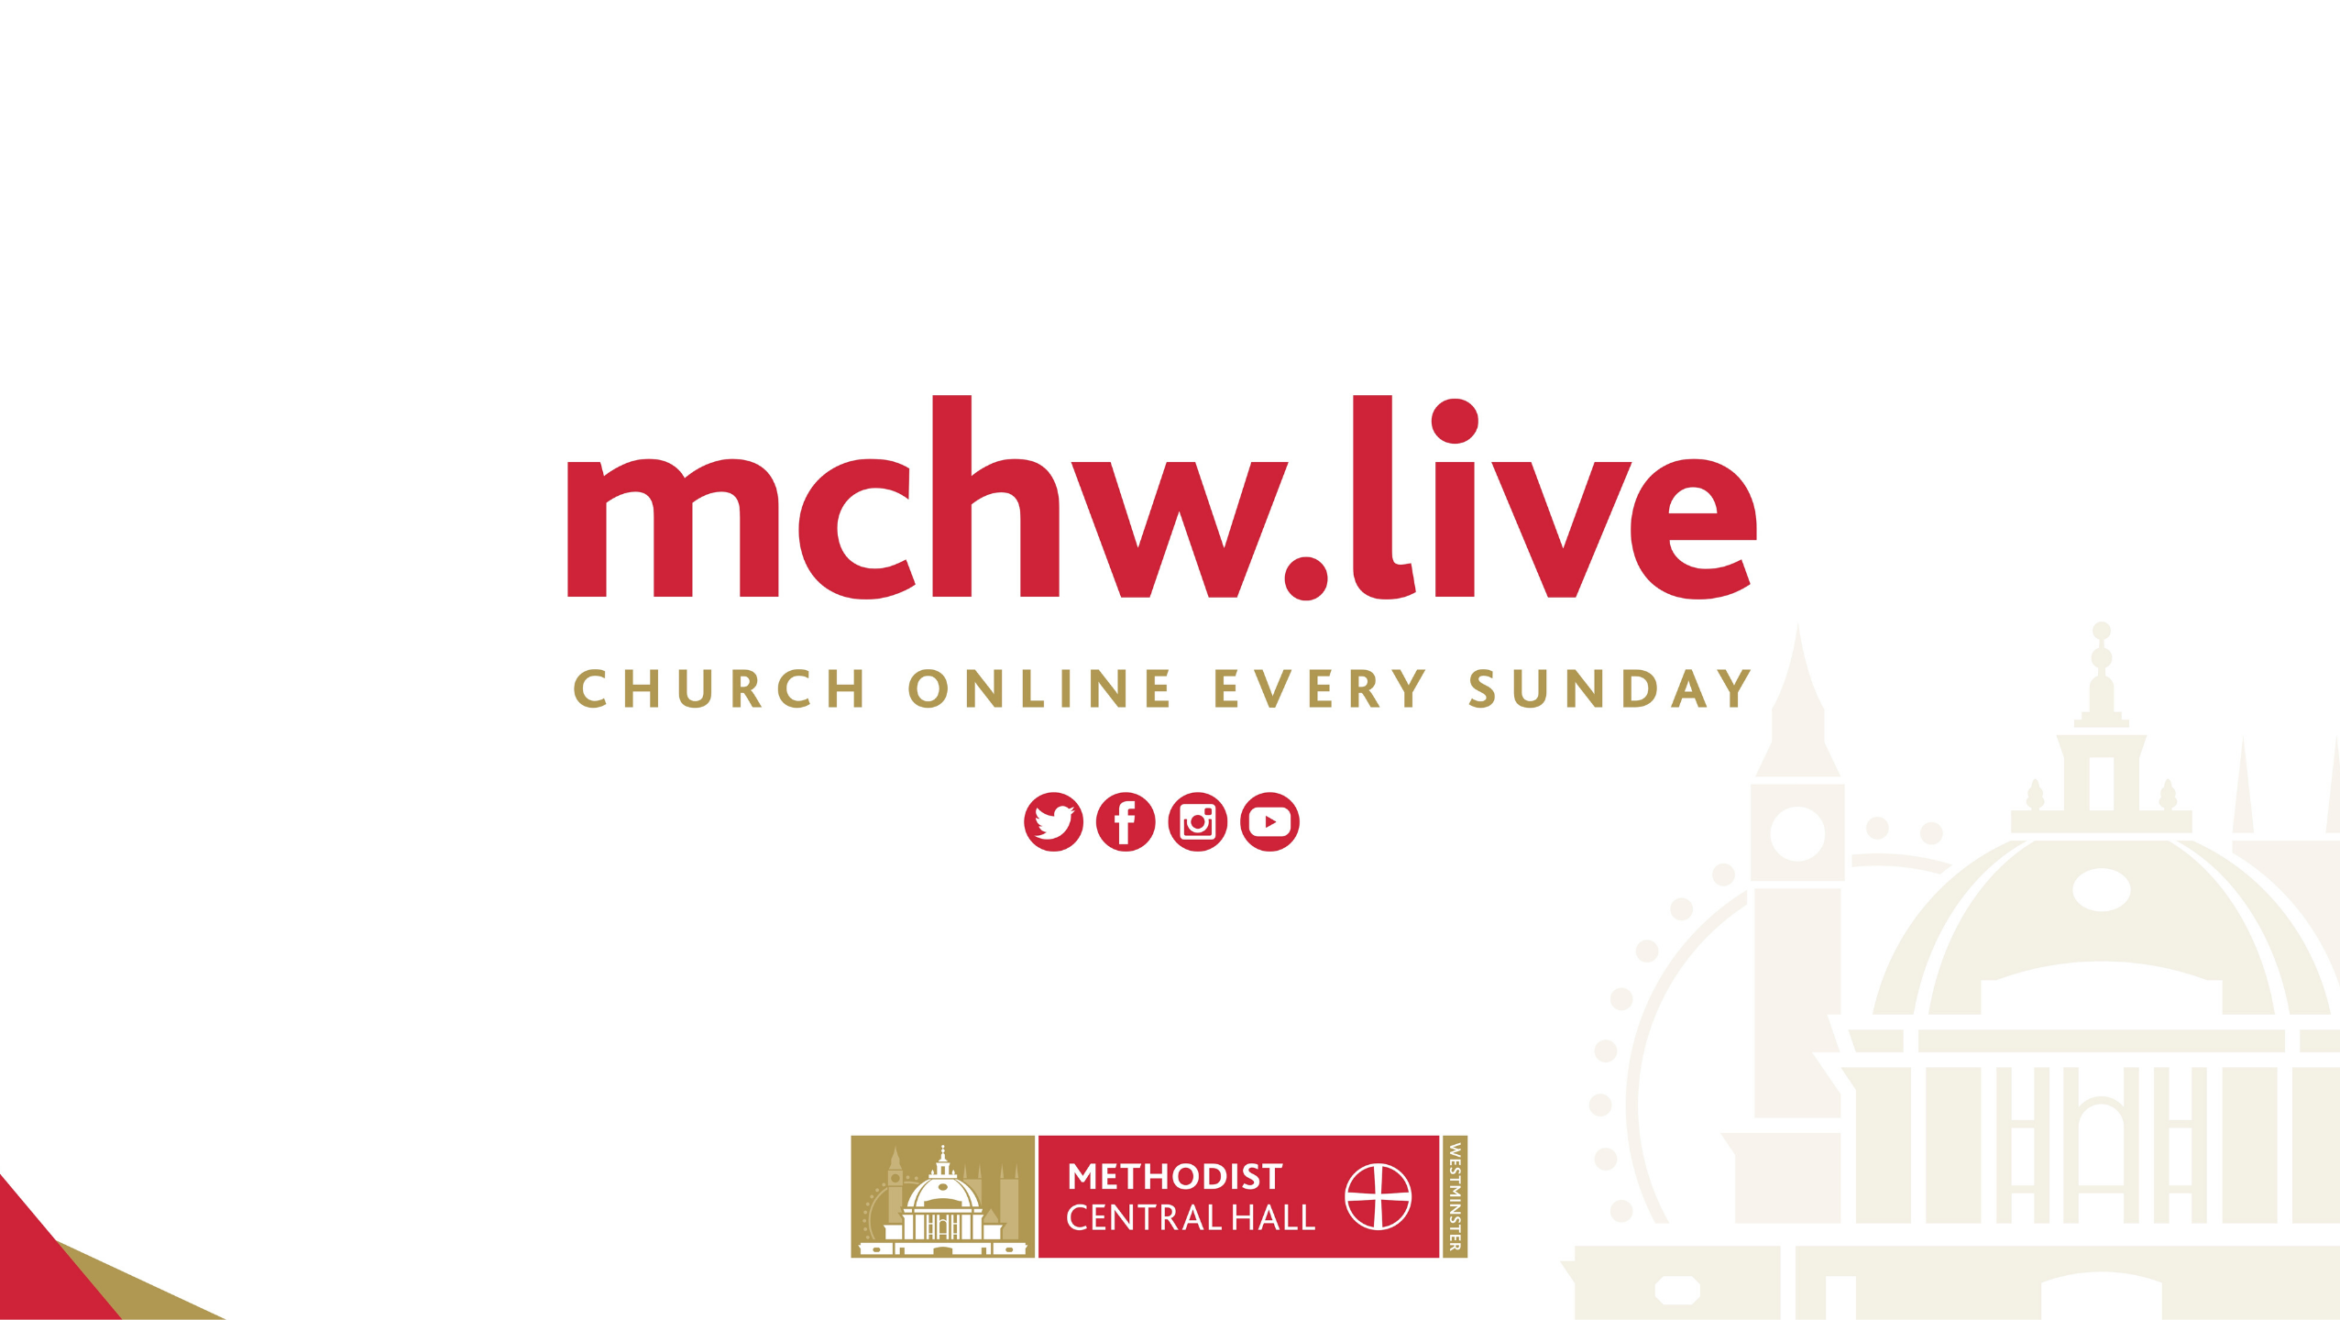 MCHW.LIVE – new website to host live streamed services.